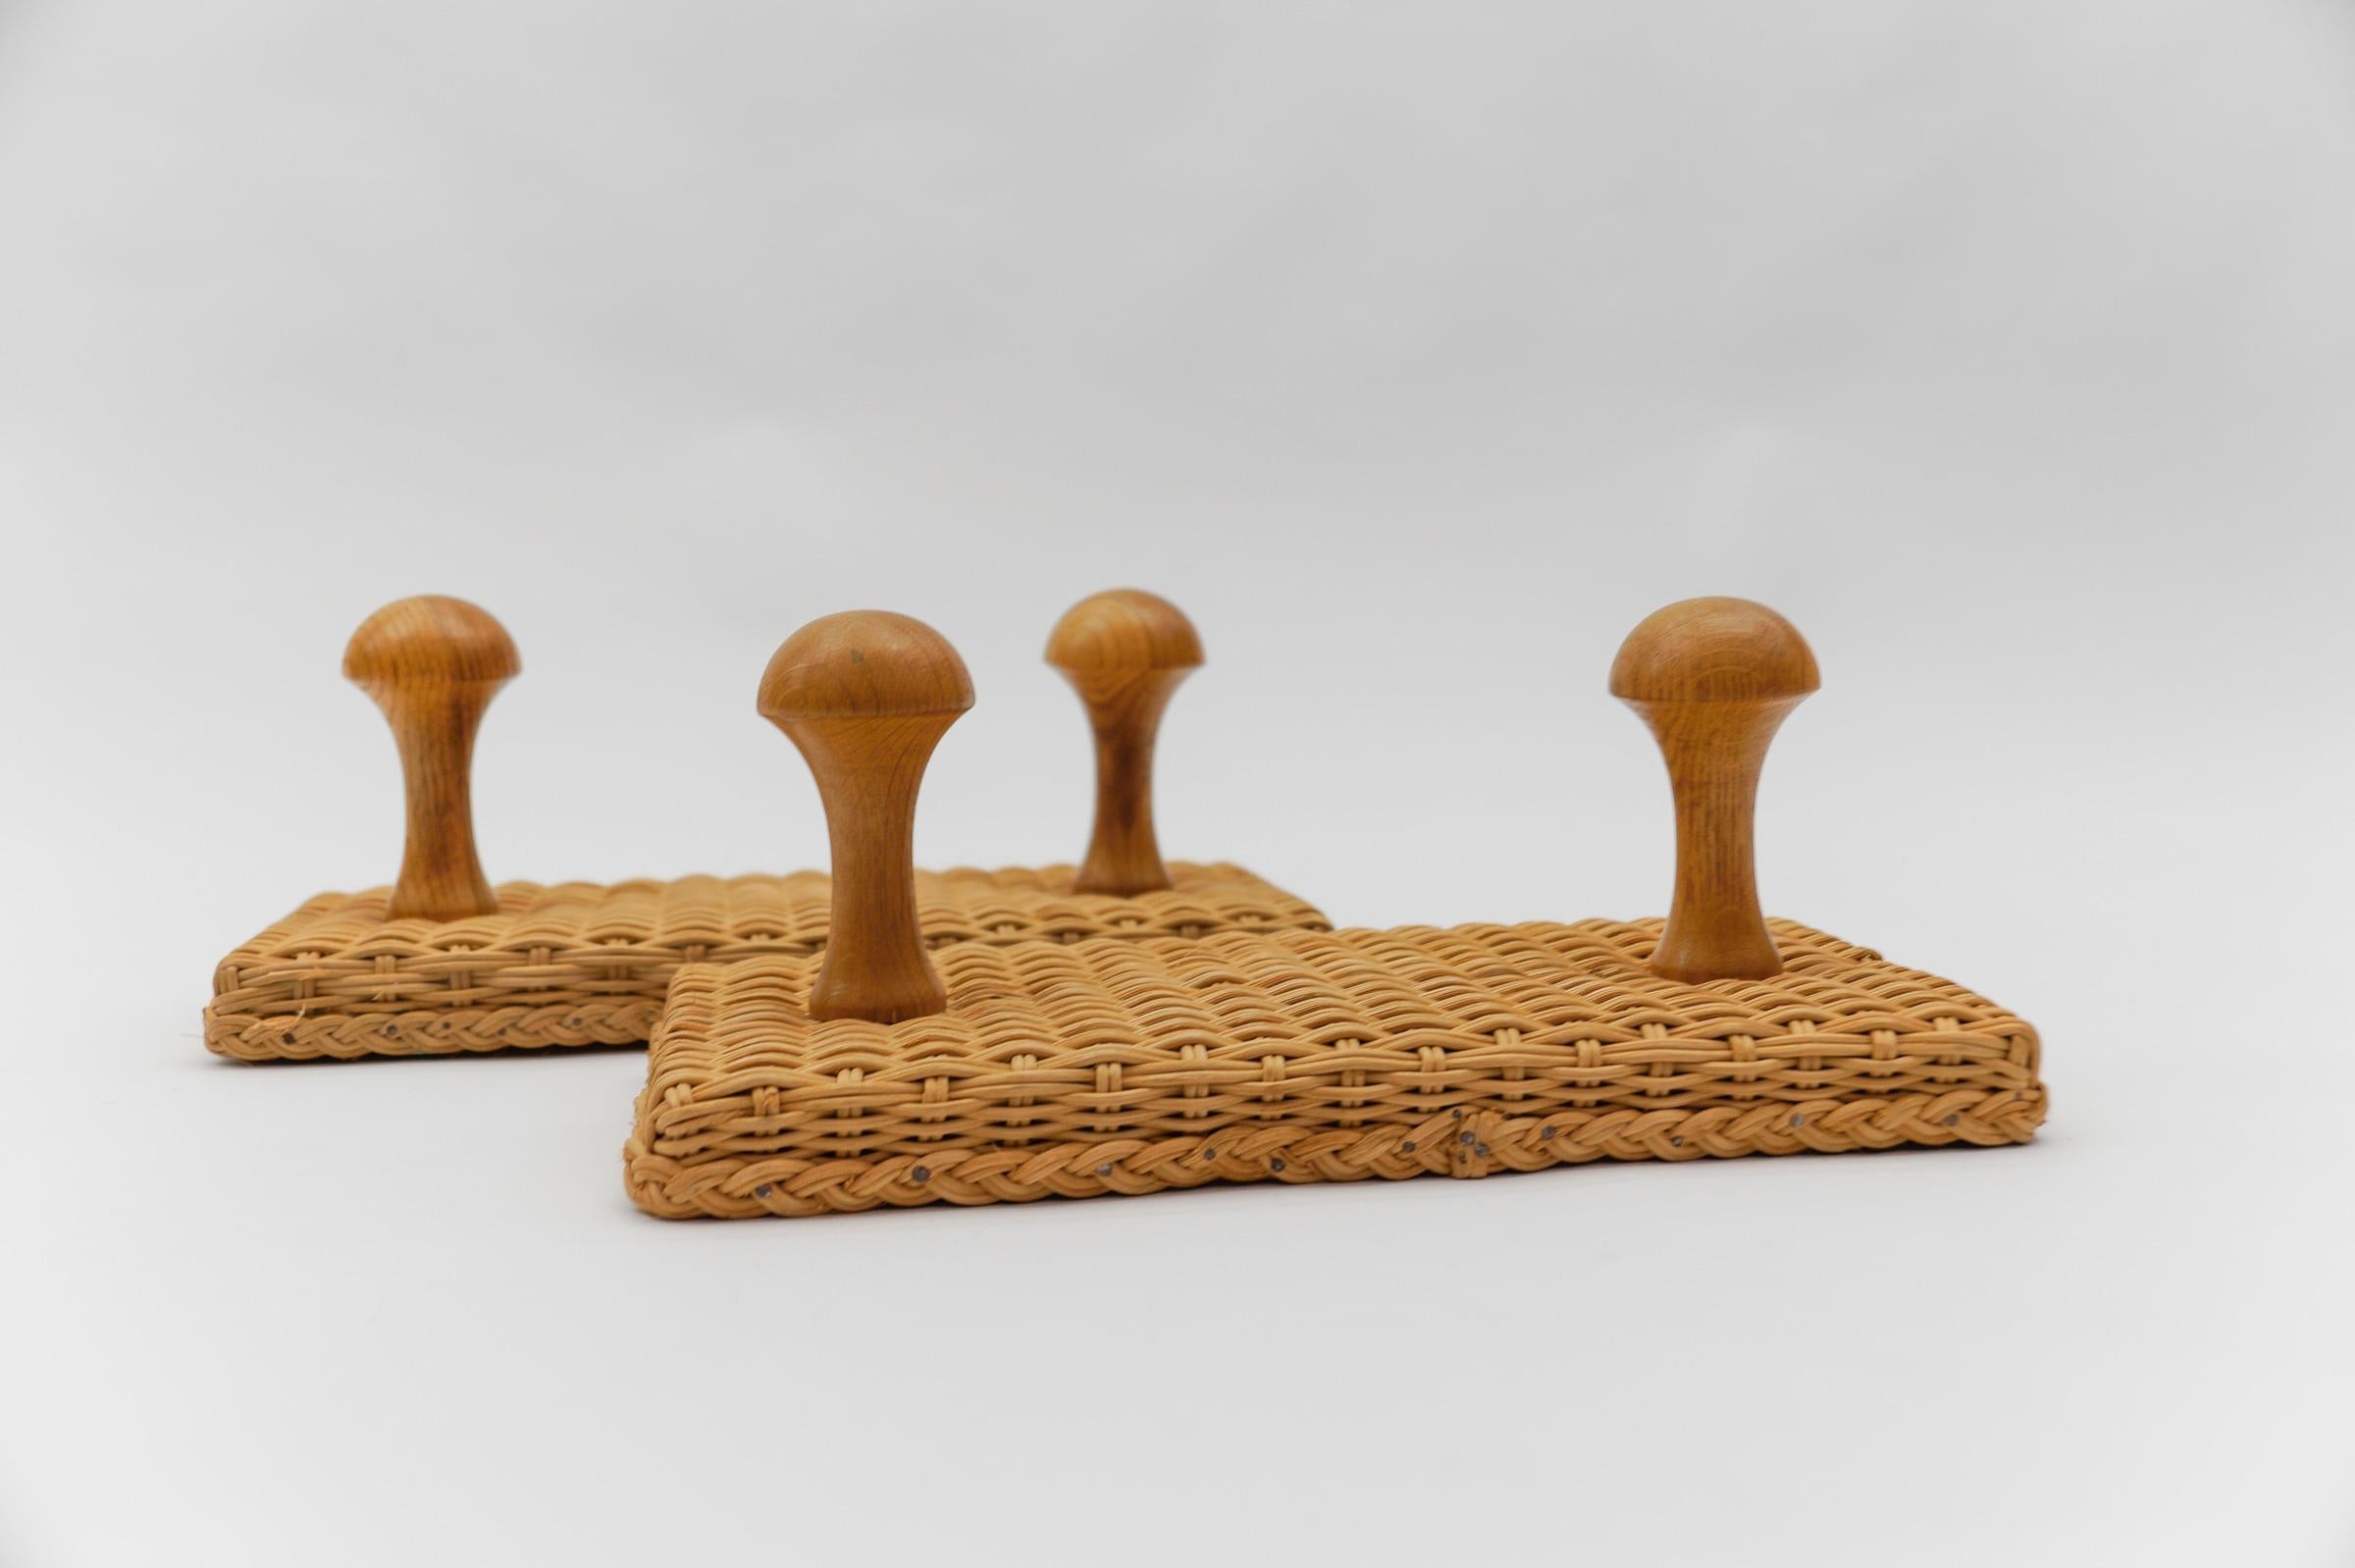 Pair of Double Scandinavian Wall Mounted Coat Hooks in Rattan and Wood, 1960s For Sale 6